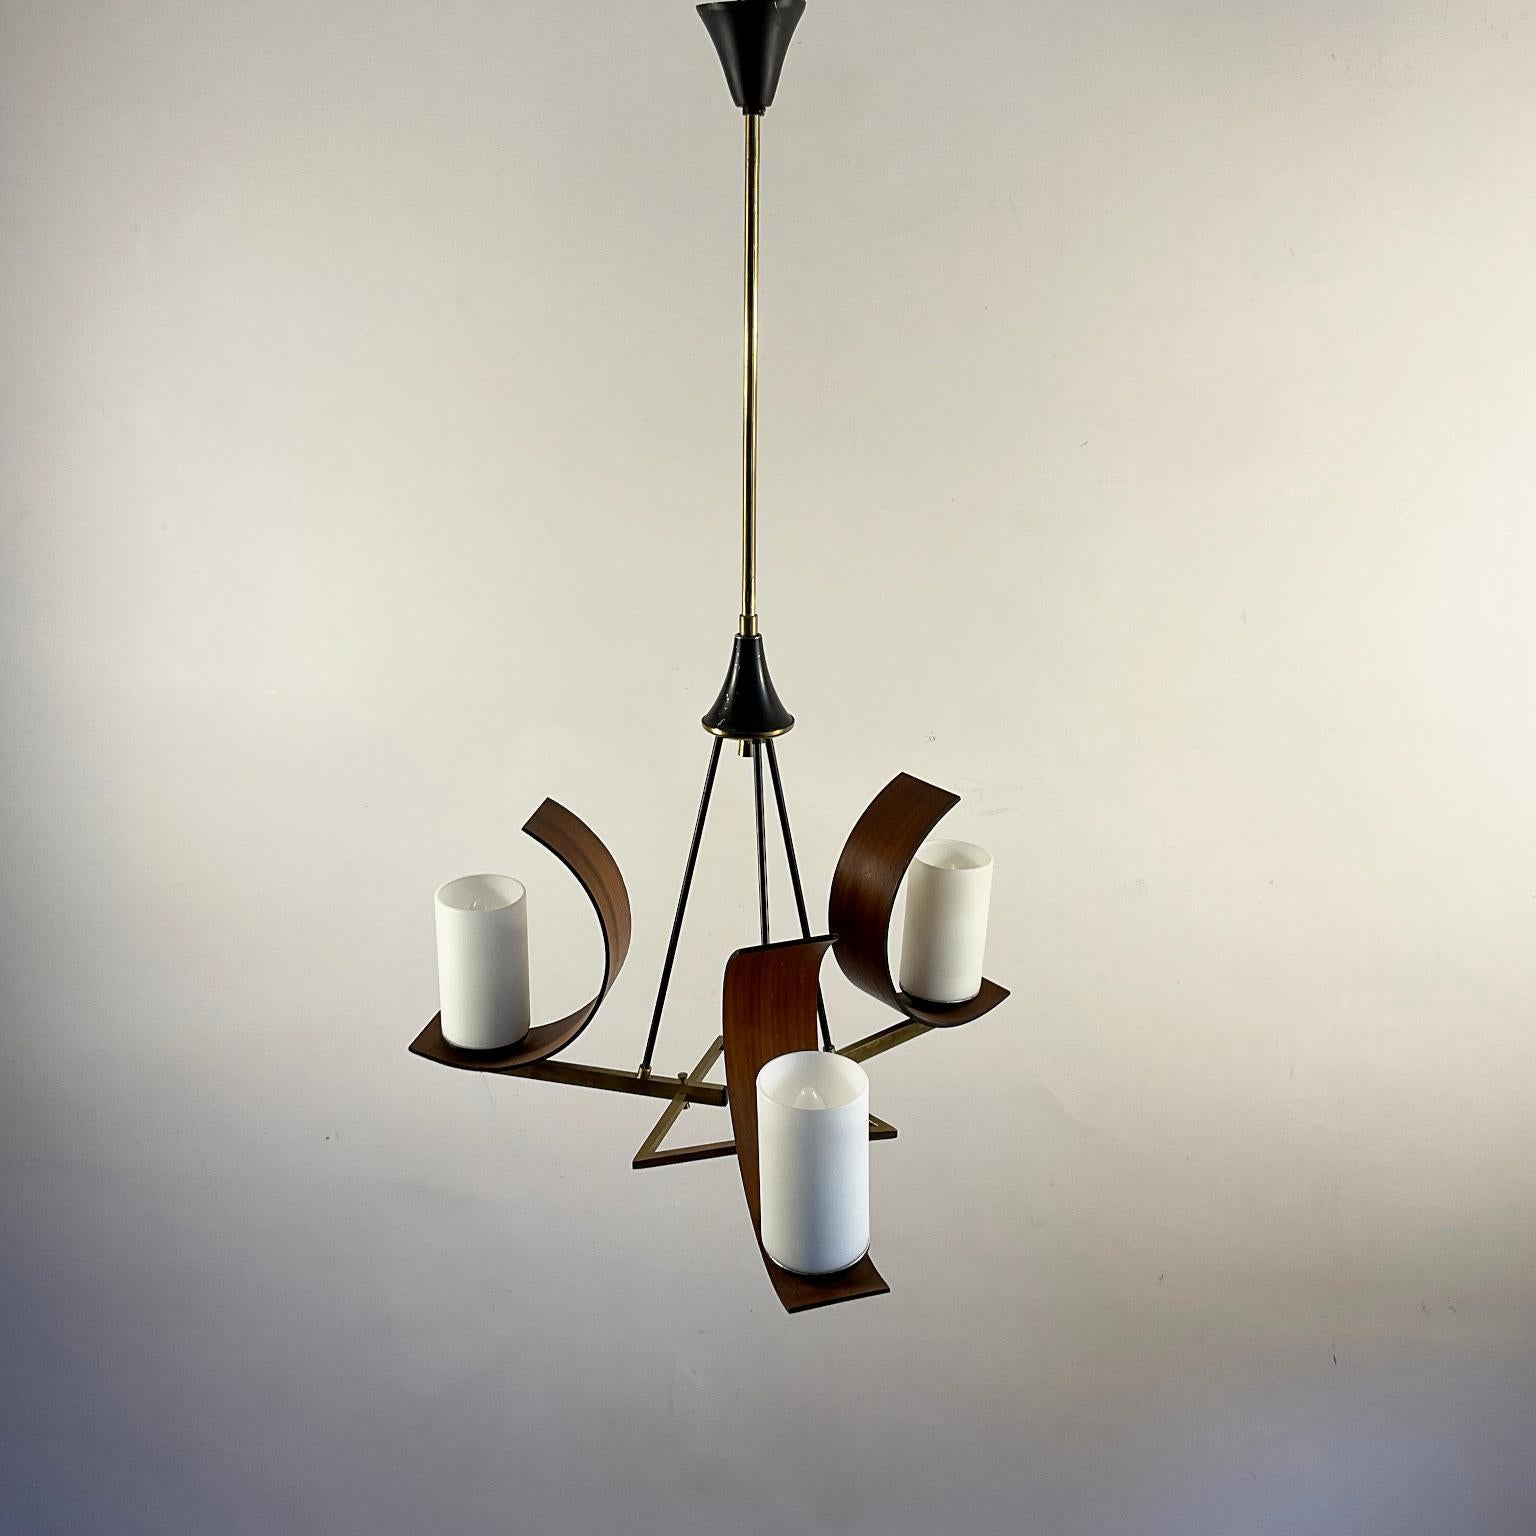 1960s three-armed brass pendant lamp attributed to the famous Italian lighting manufacturer Stilnovo.
Each carries three opal glass shades and is adorned with a teak wood semi-circle.